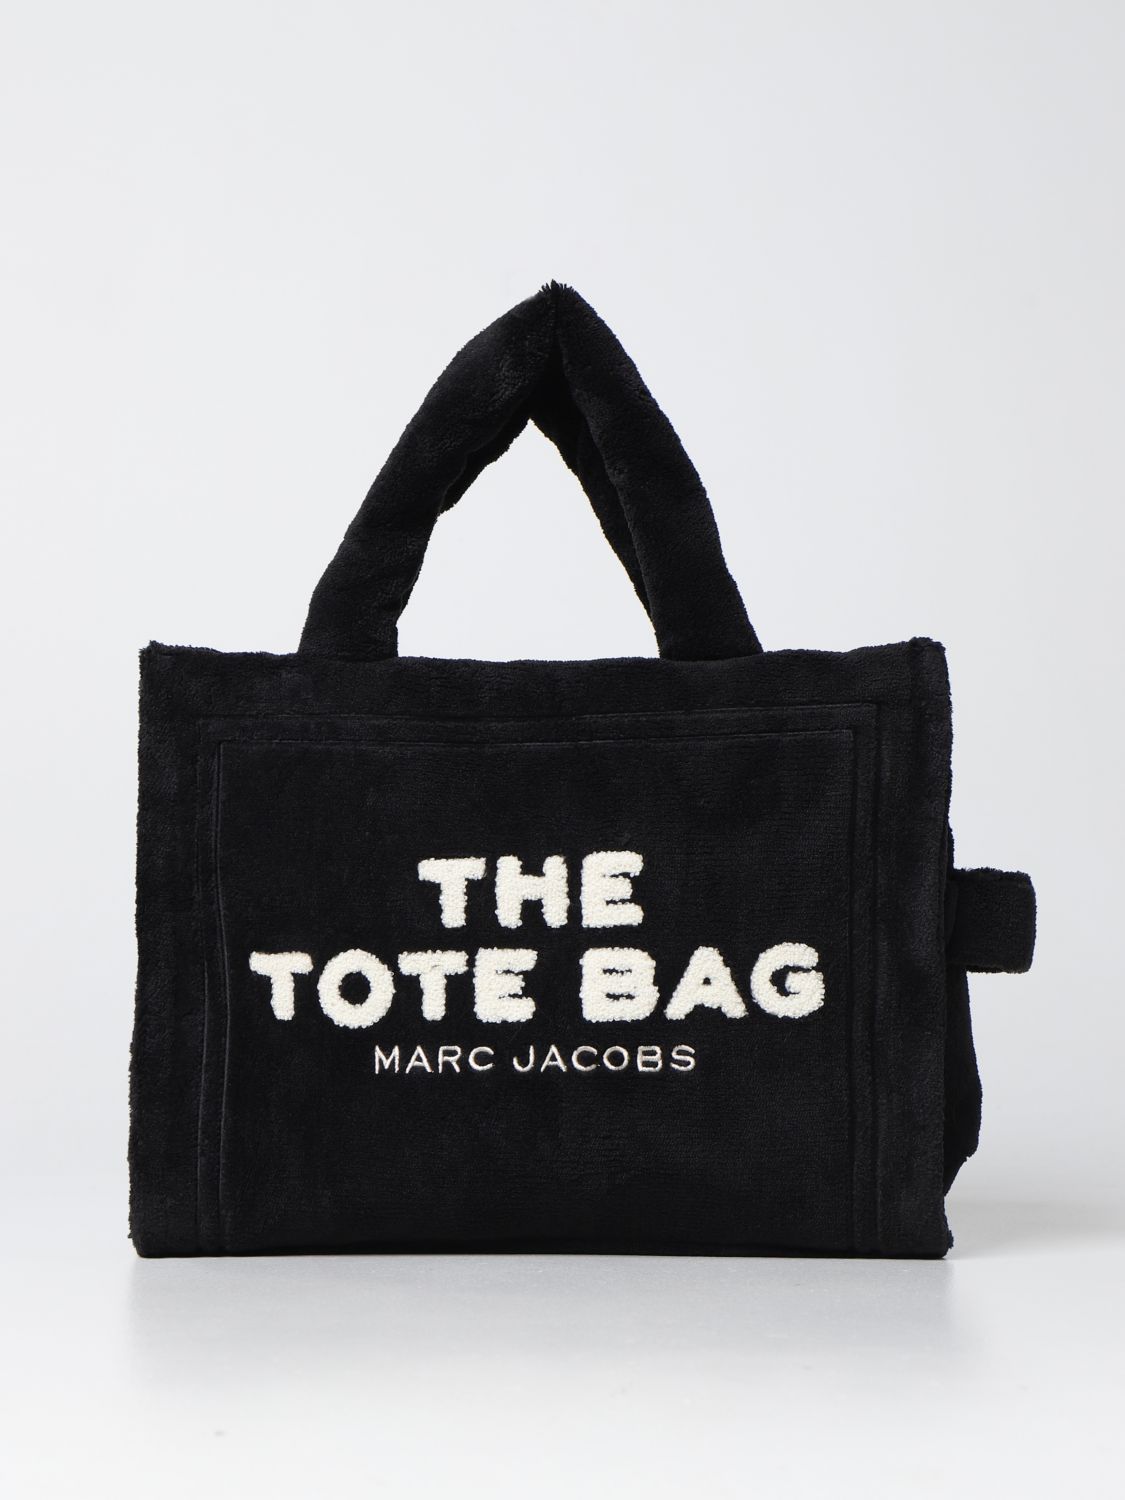 MARC JACOBS: The Tote Bag terry cloth bag - Black | Marc Jacobs tote ...